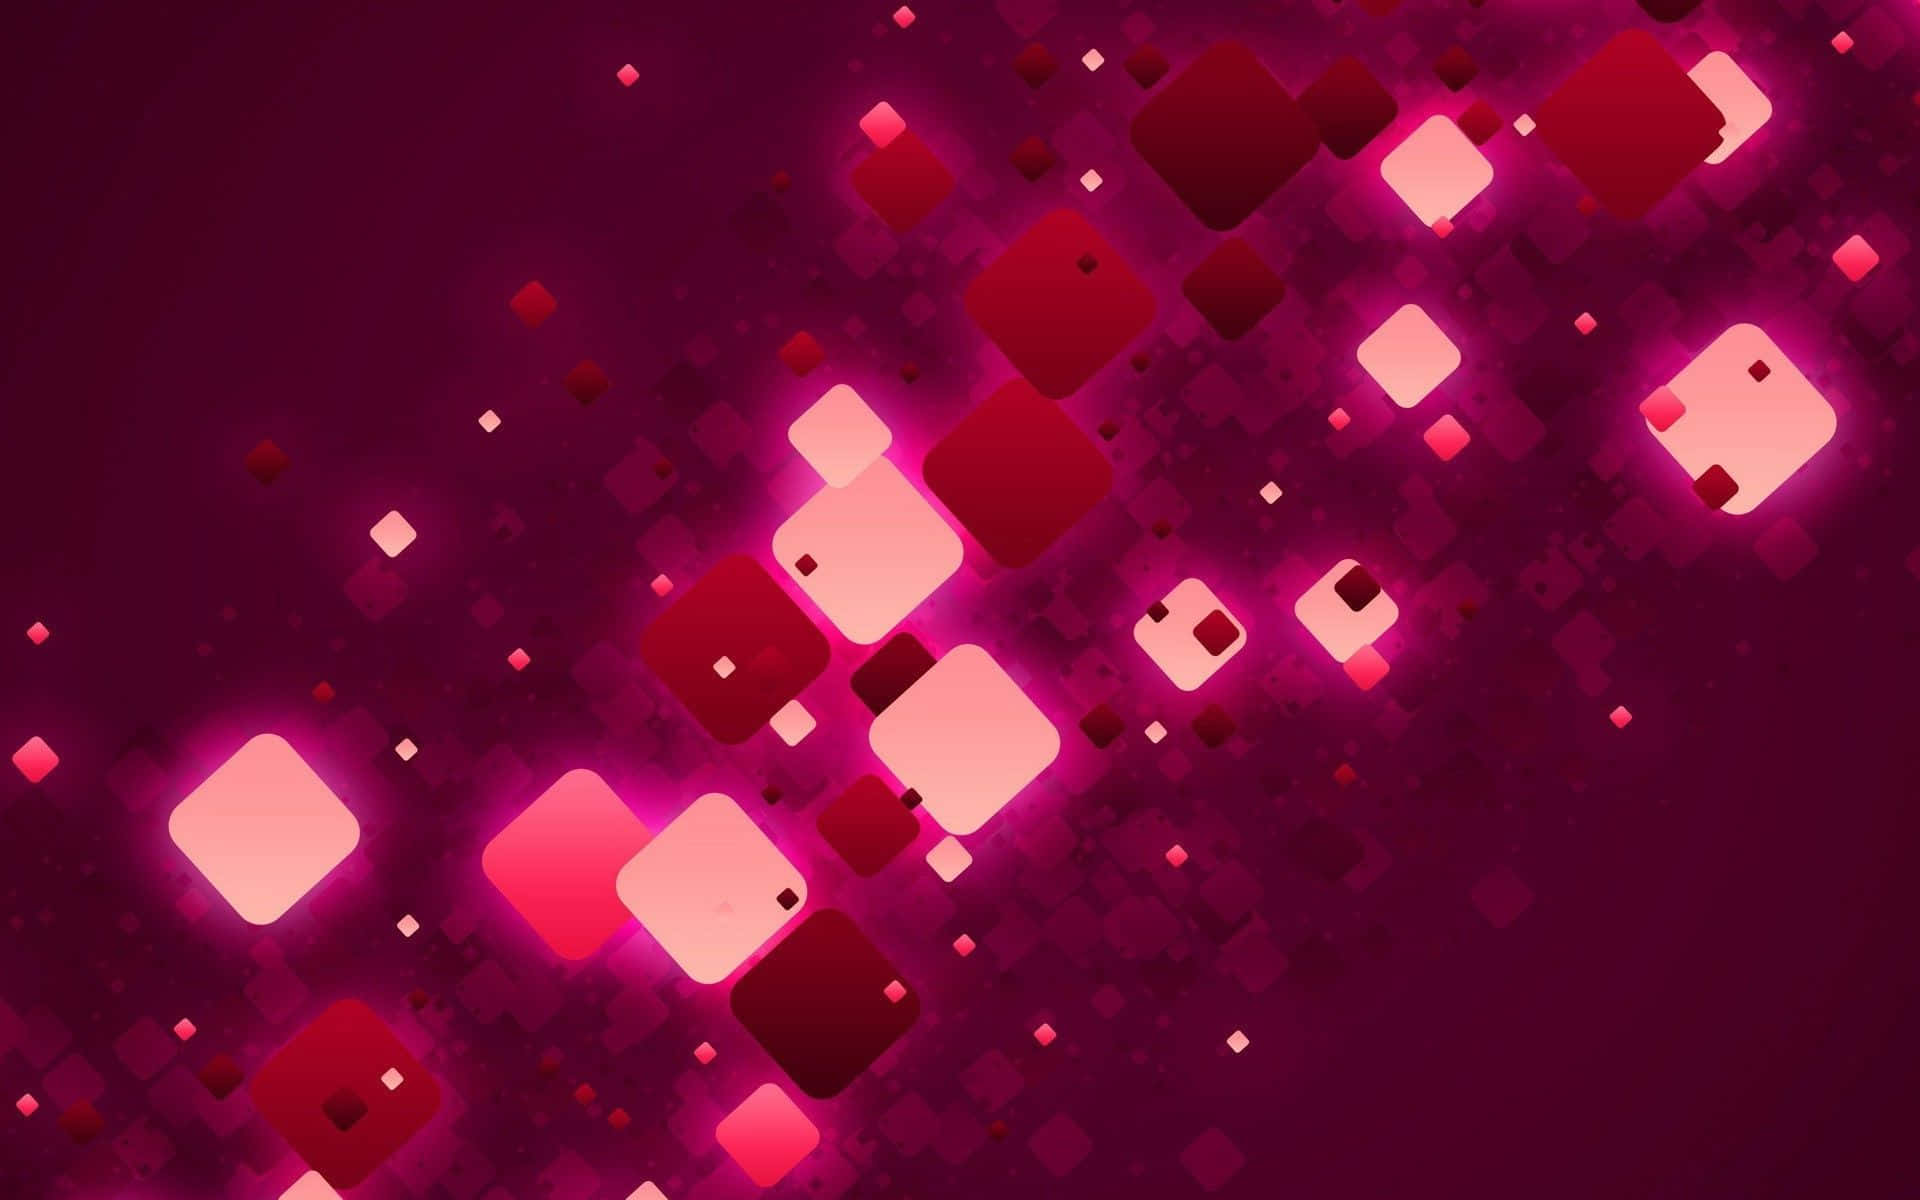 Enhance your desktop with this radiant Cool Pink background.